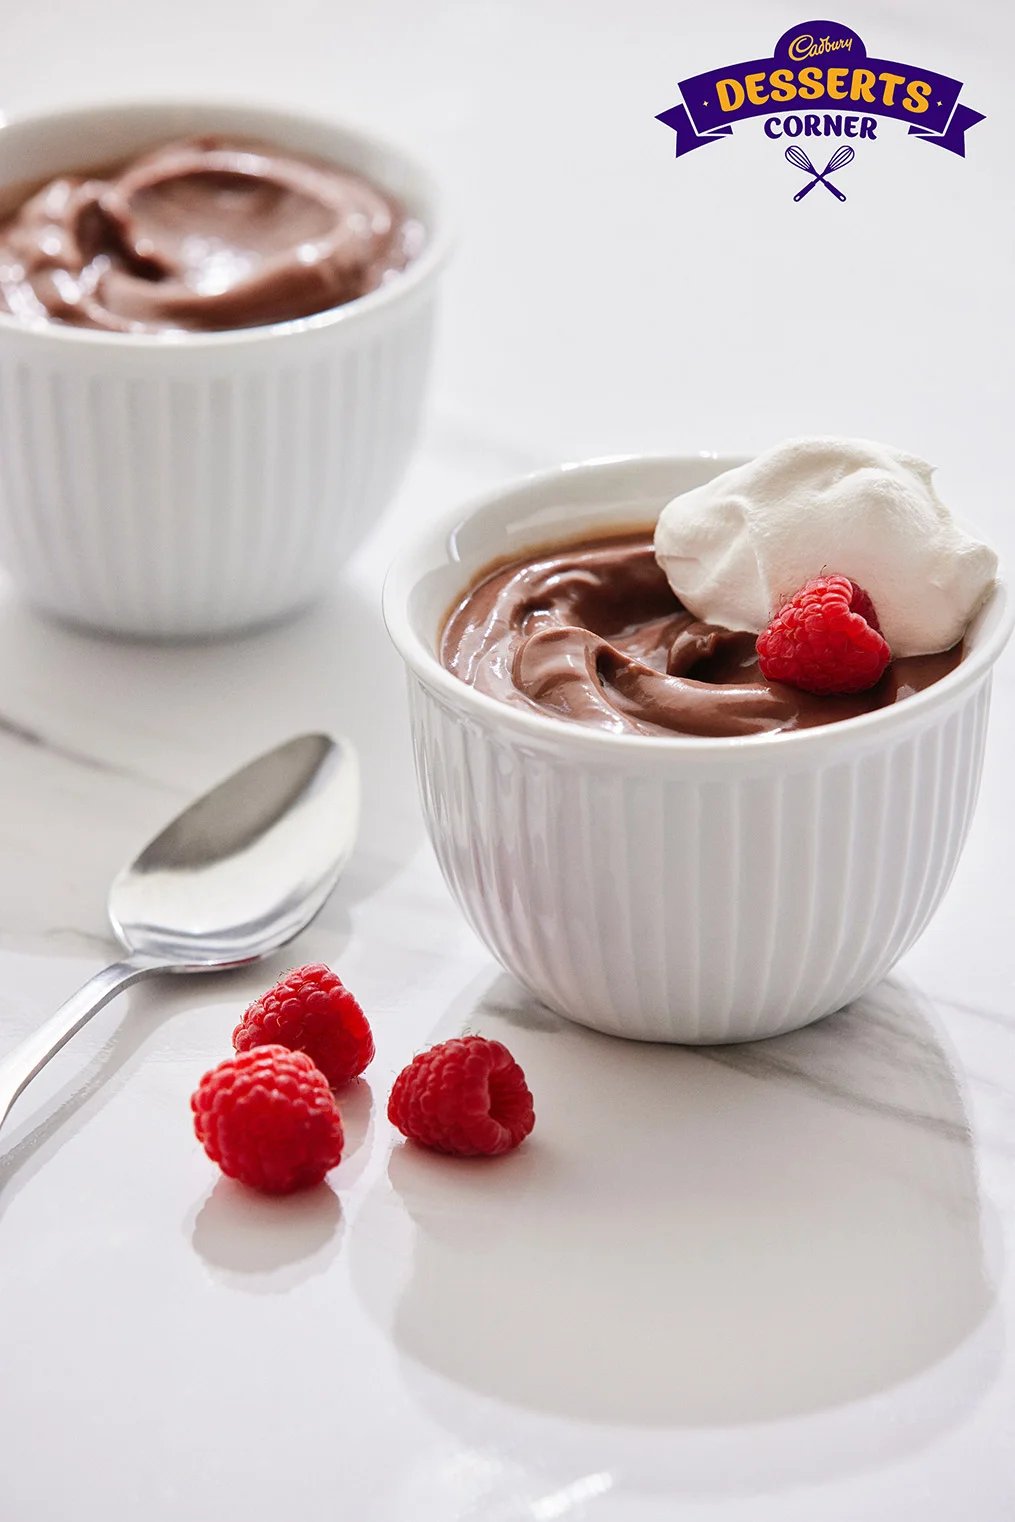 chocolate-pudding-with-whipped-cream-and-berries_updated